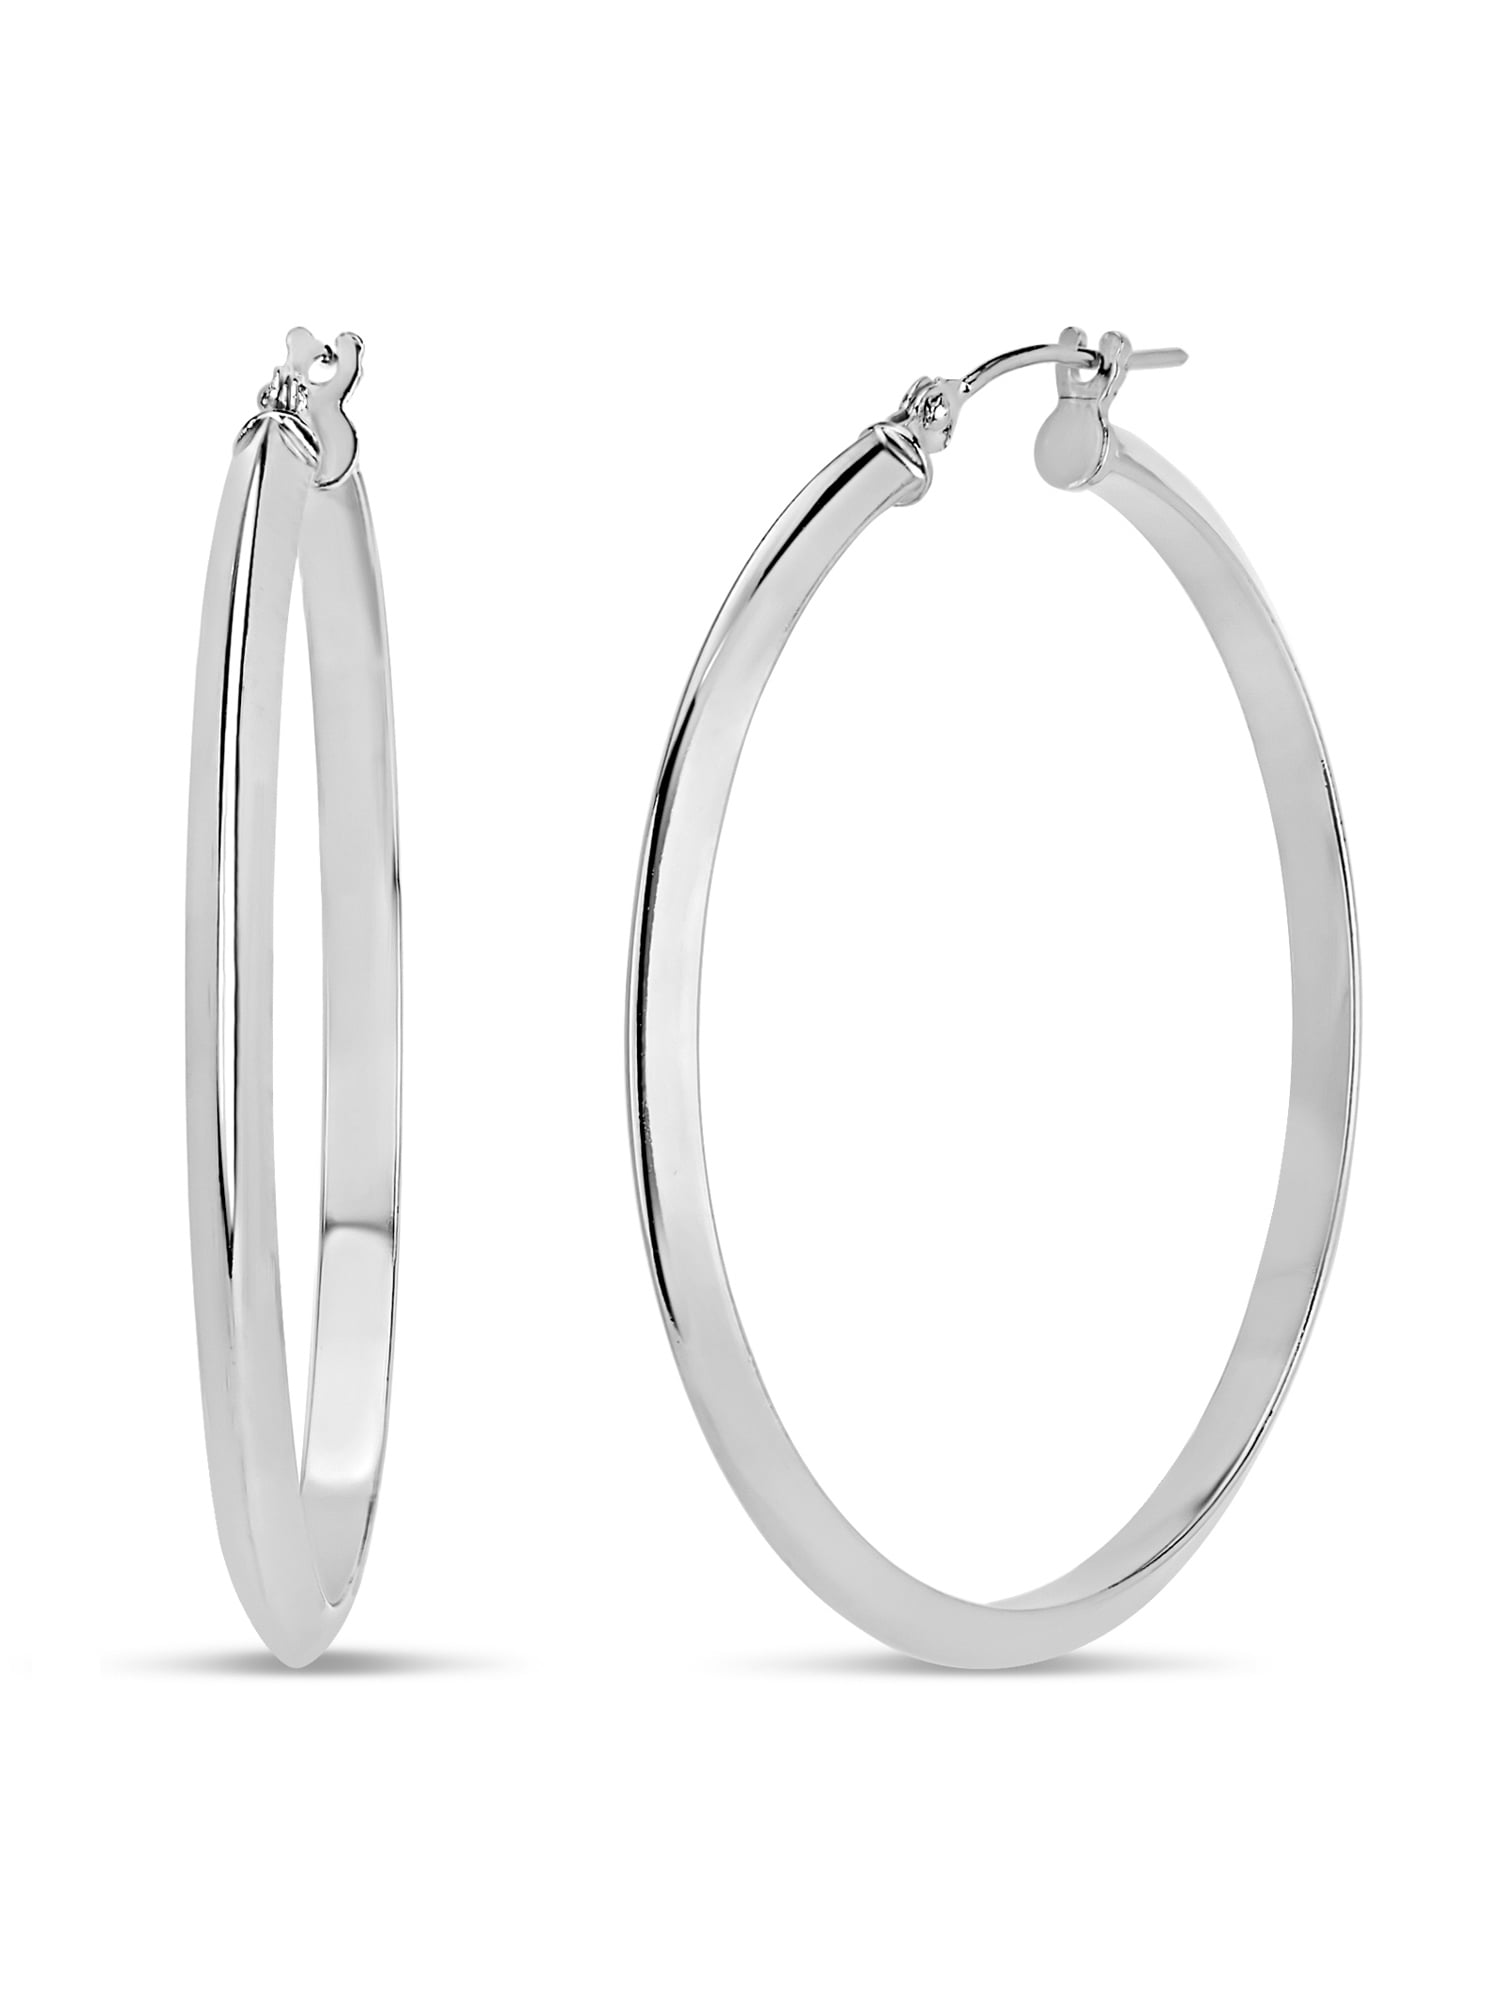 925 Sterling Silver Wide Square Edge Square Hooped Earrings    30 x 19 x 5 mm 